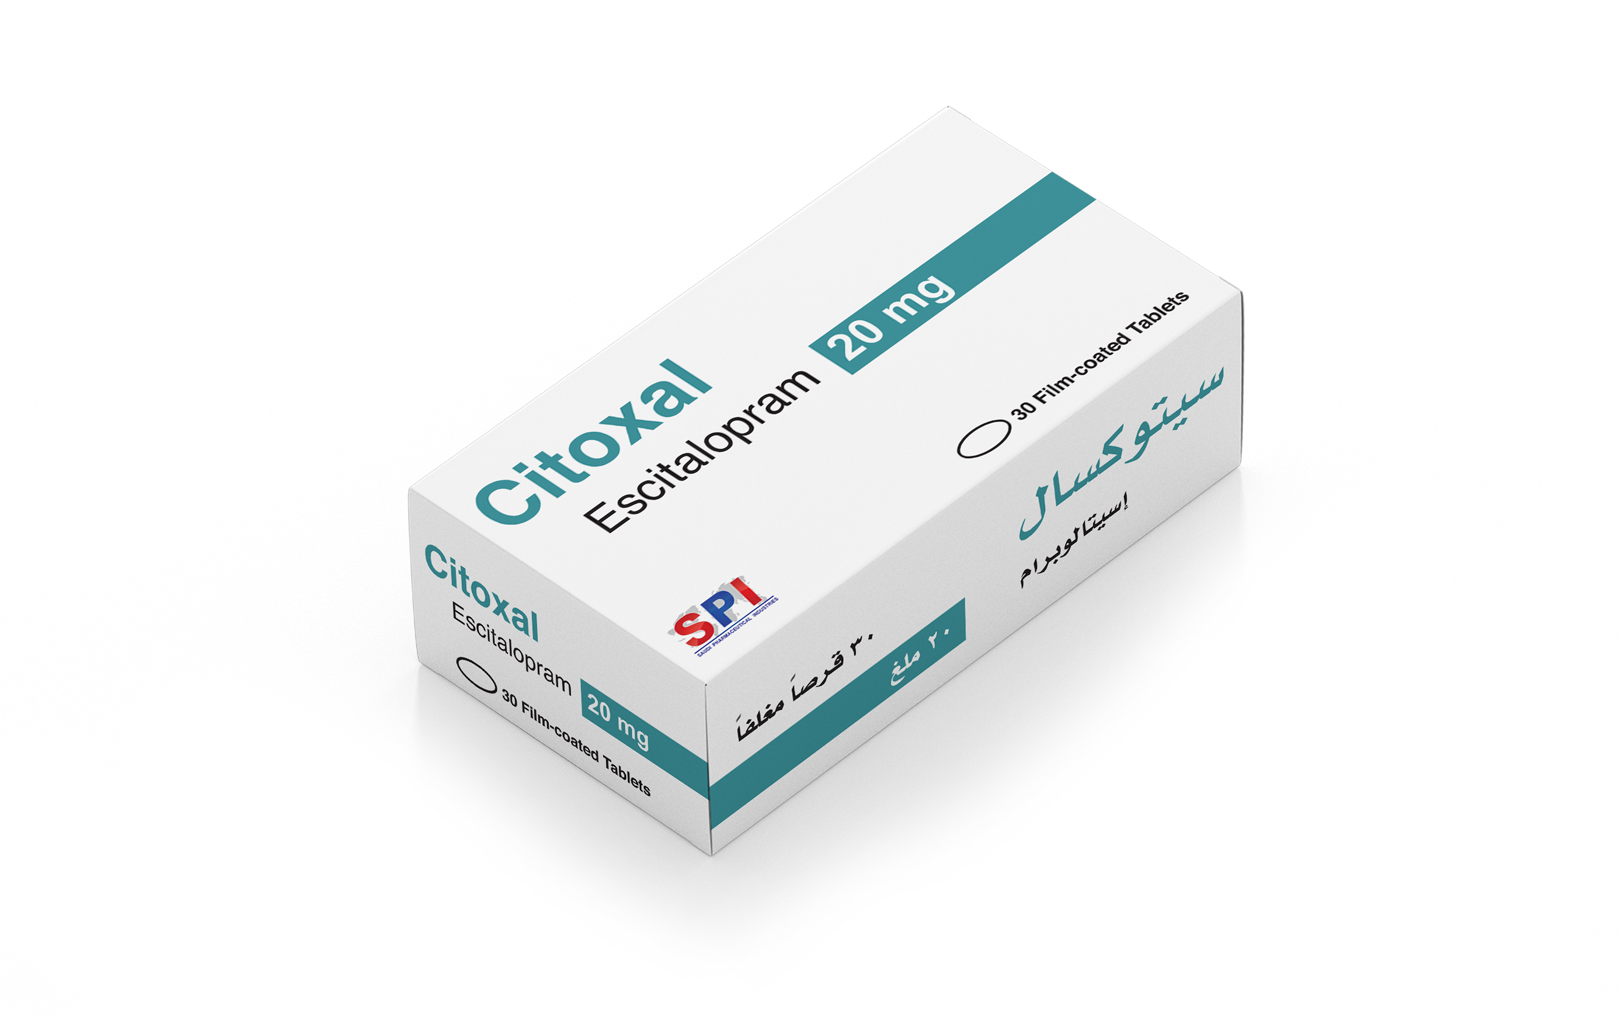 Citoxal 20 mg Film-coated Tablet